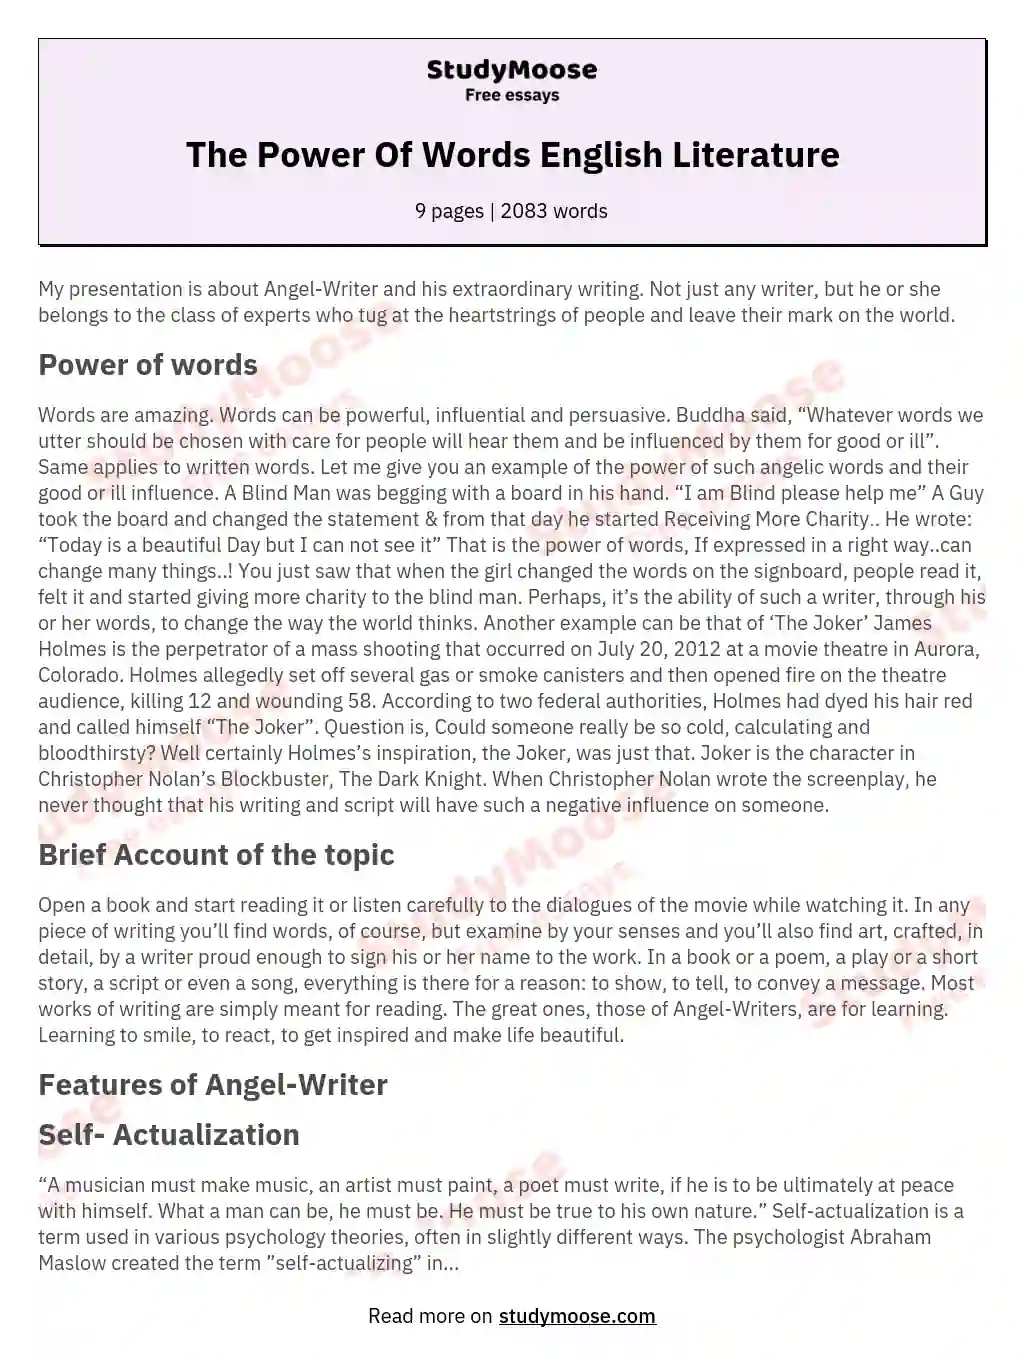 The Power Of Words English Literature essay